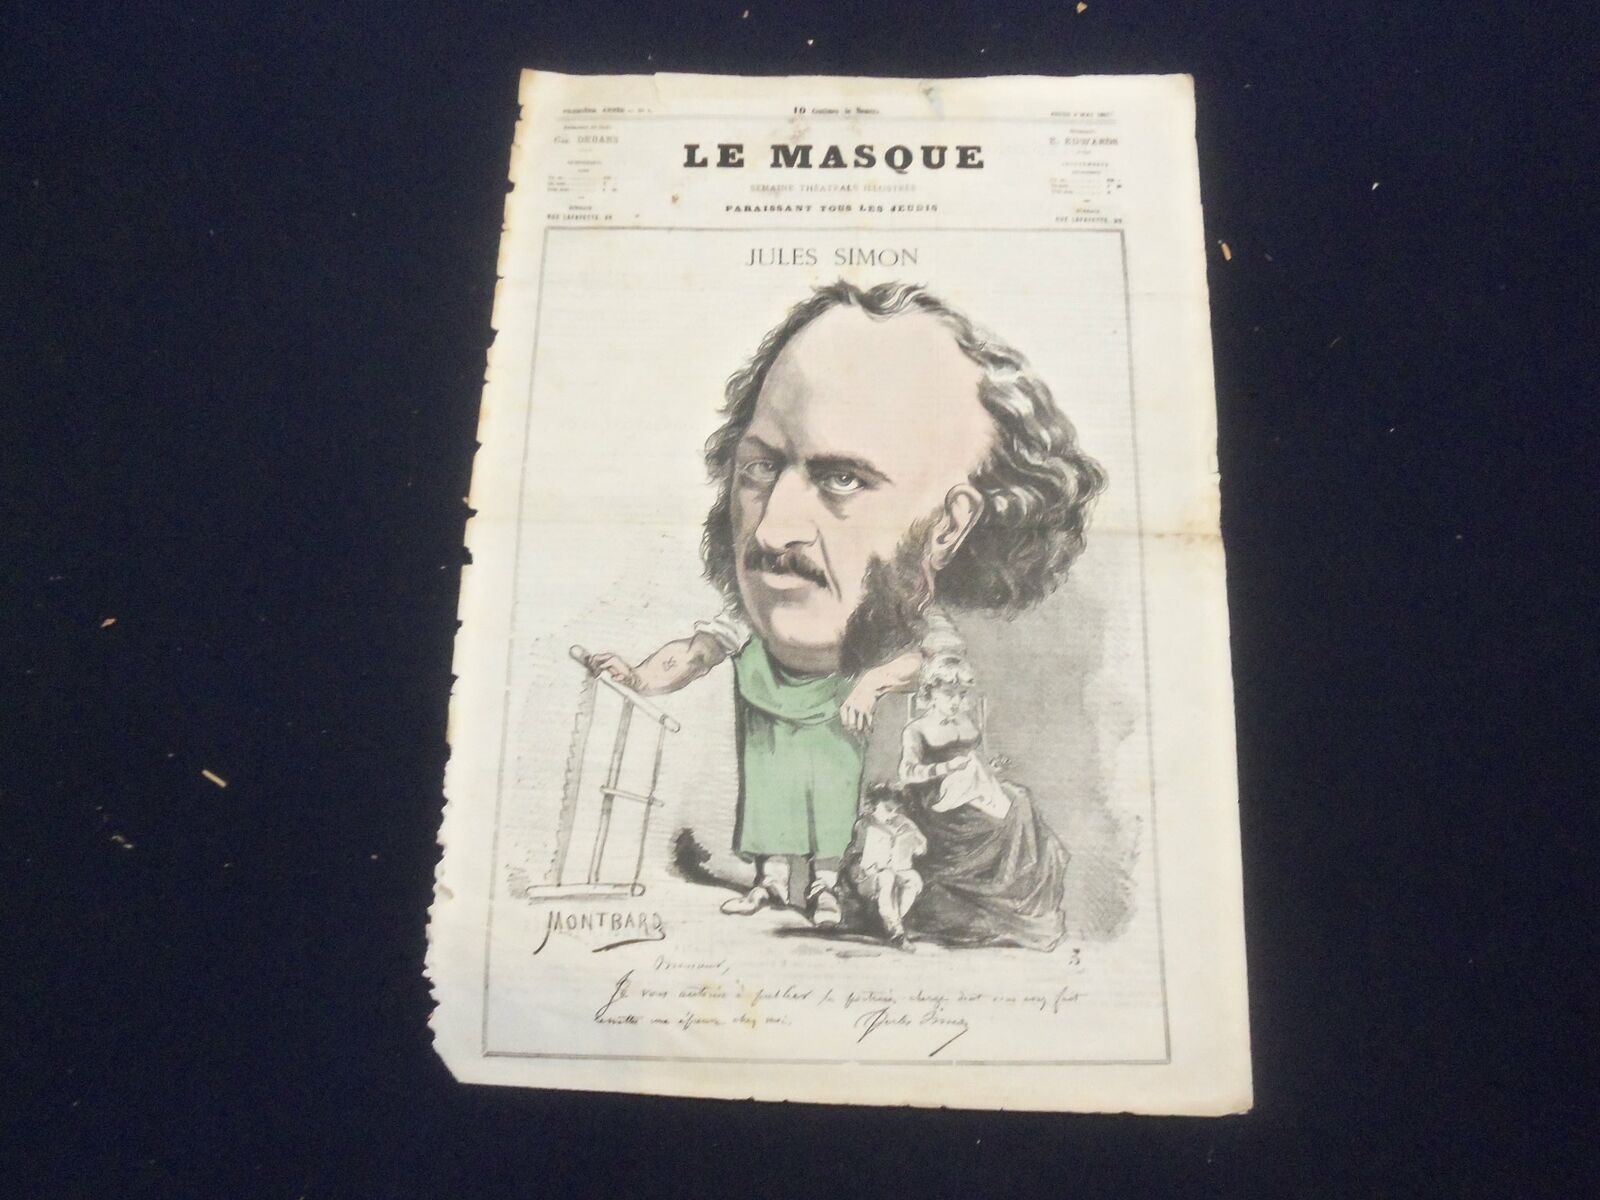 1867 MAY 9 LE MASQUE NEWSPAPER - JULES SIMON - MONTBARD - FRENCH - FR 2841